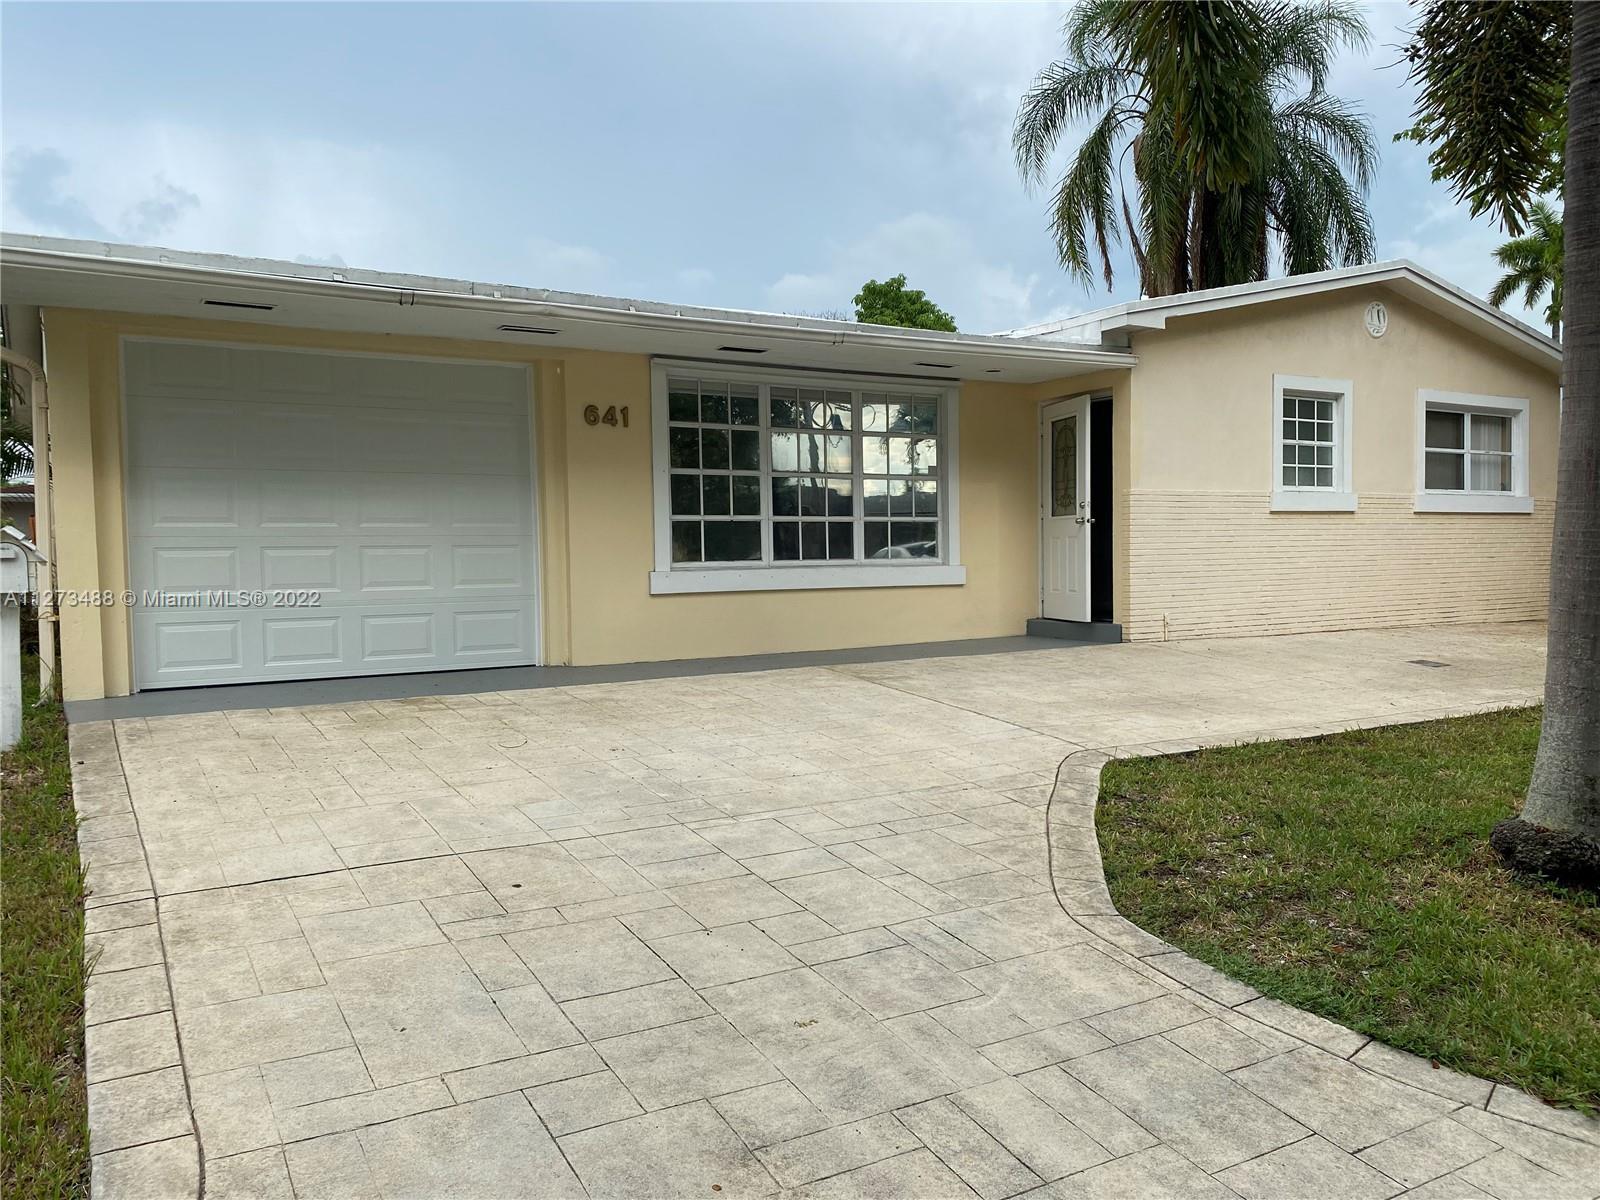 LIVE IN THE HEART OF HALLANDALE BEACH. VERY SPACIOUS SINGLE FAMILY HOME, 3/2, WITH AN OVERSIZED FAMI